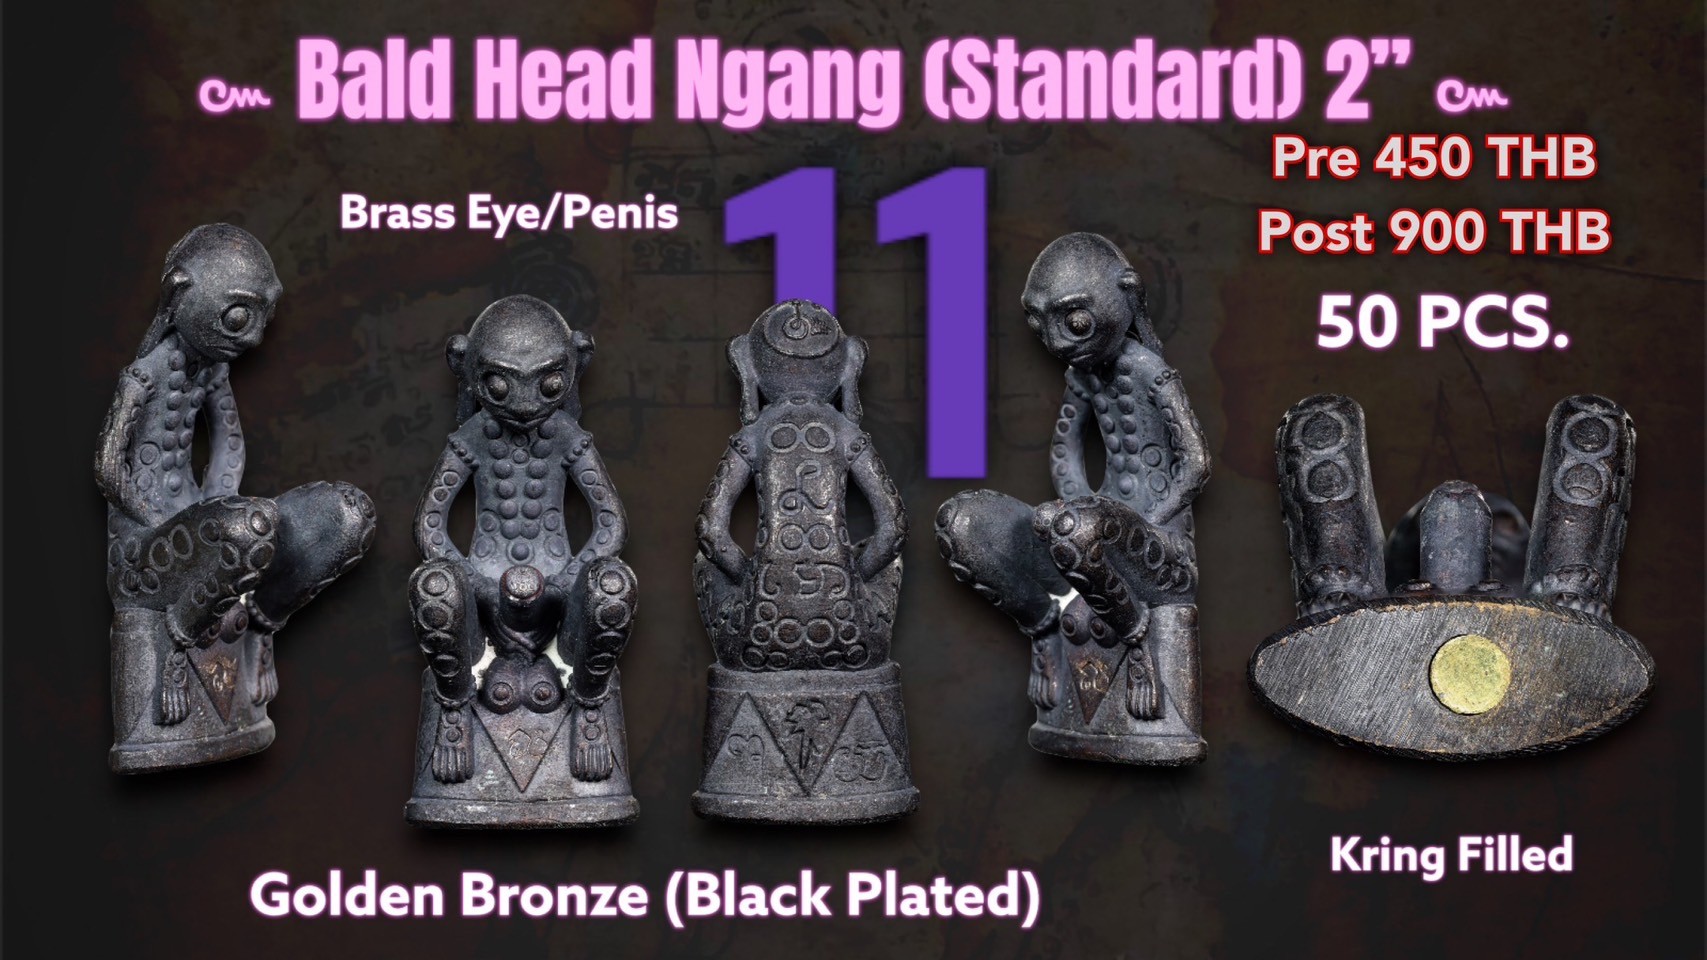 11.Bald Head Ngang Golden Bronze (Black Plated) 2 inches